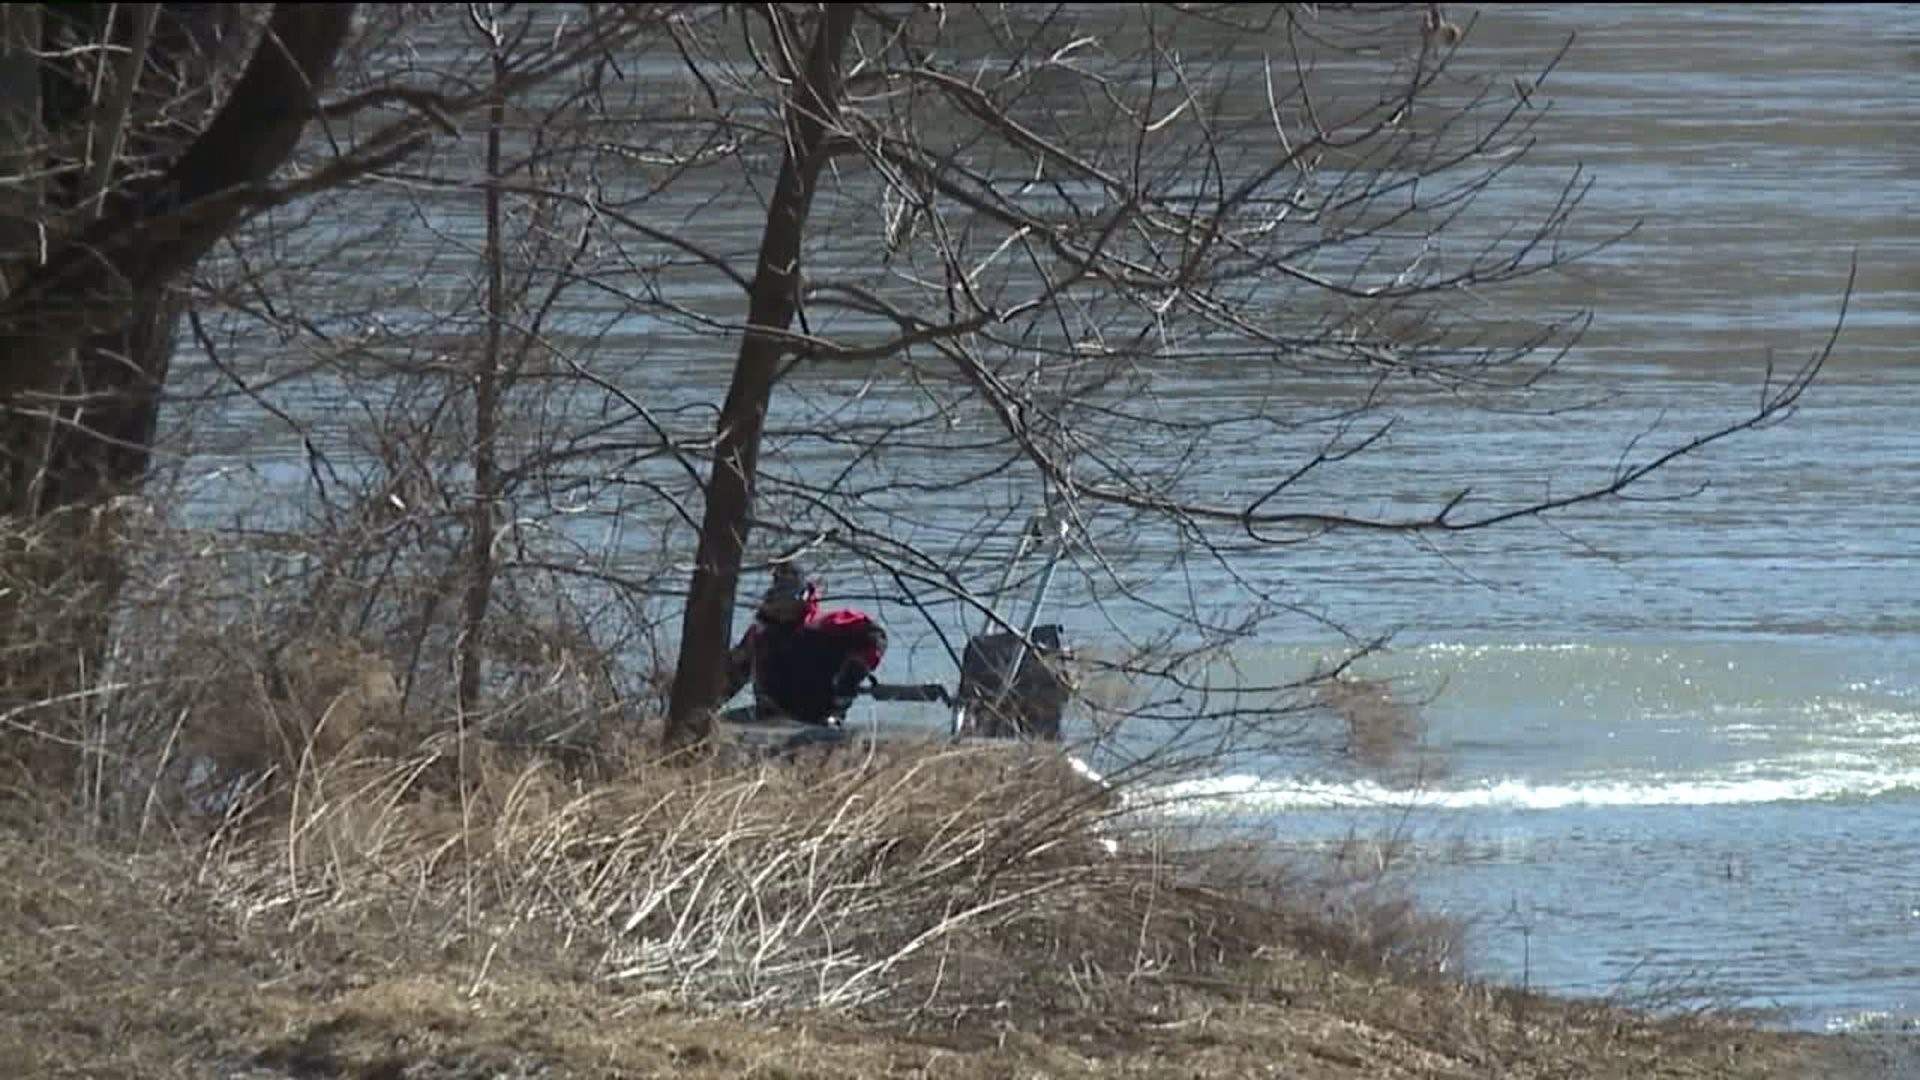 Bodies of Father and Infant Pulled from Susquehanna River